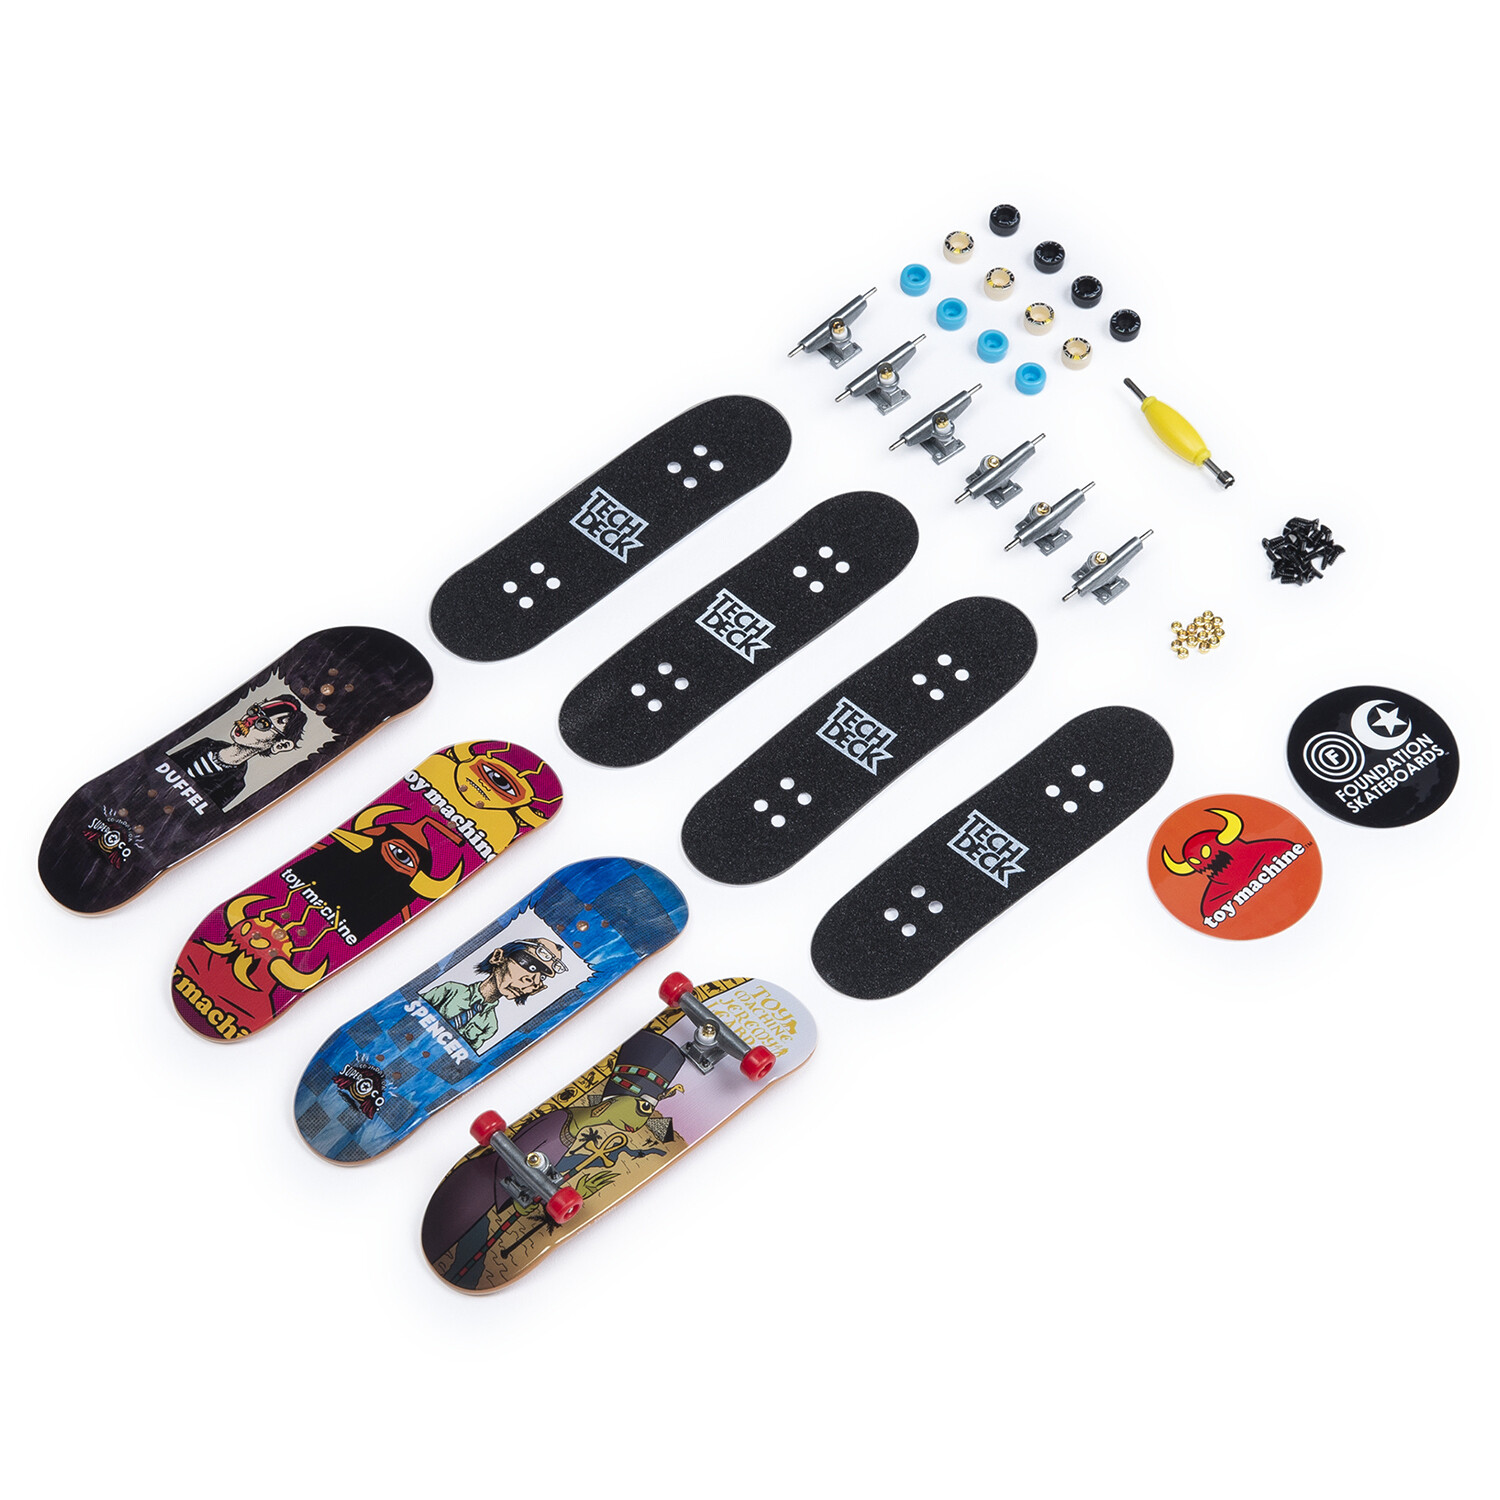 Single Tech Deck Ultra DLX Skateboards Figures 4 Pack in Assorted styles Image 6